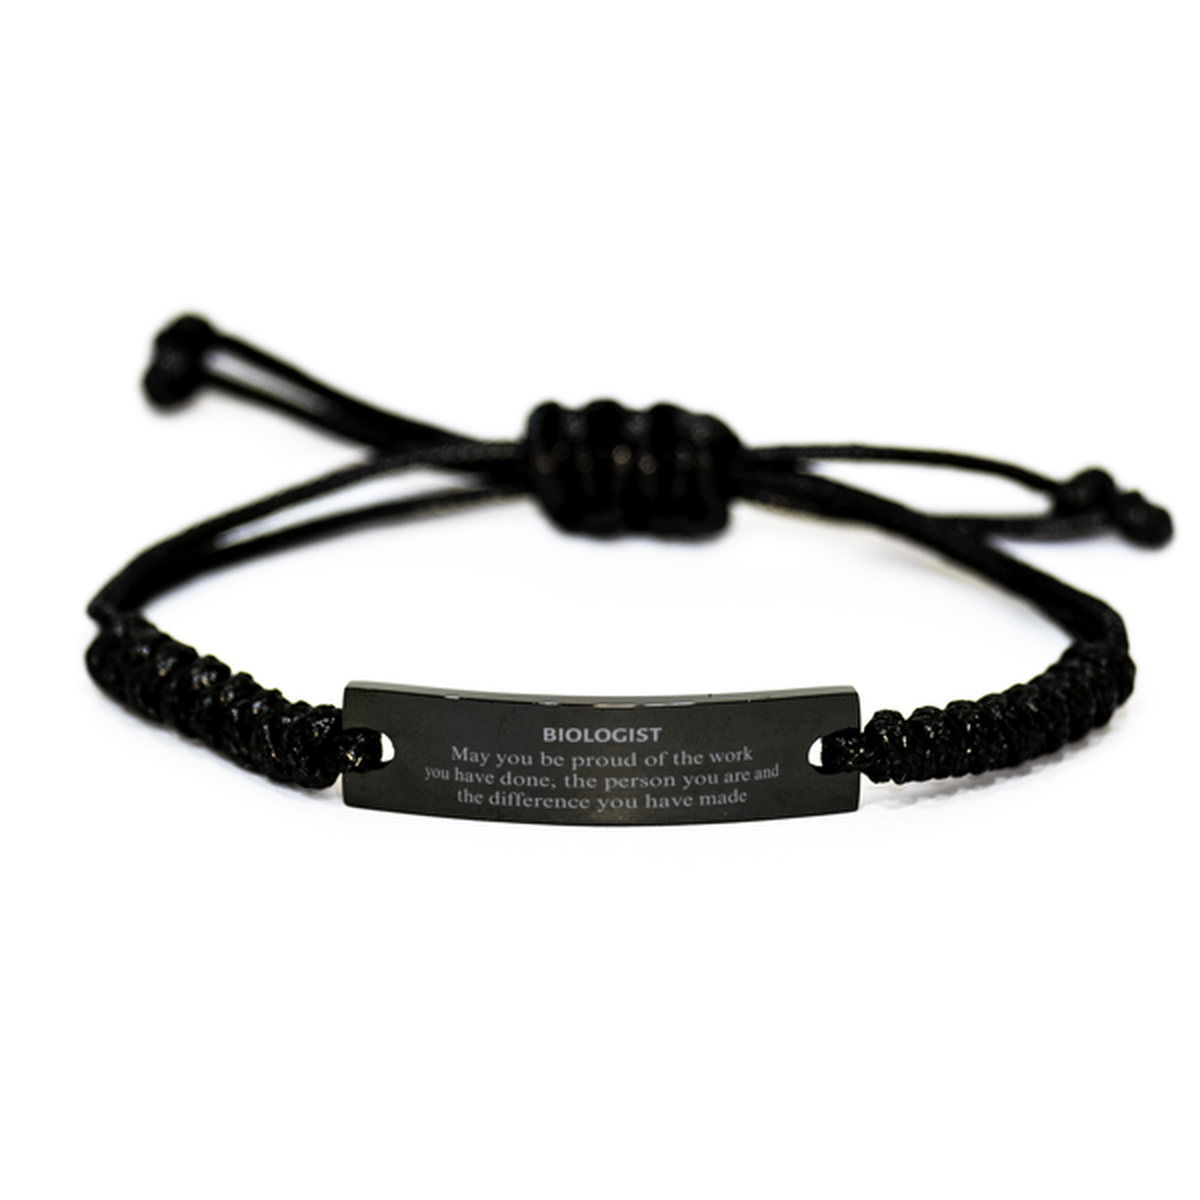 Biologist May you be proud of the work you have done, Retirement Biologist Black Rope Bracelet for Colleague Appreciation Gifts Amazing for Biologist